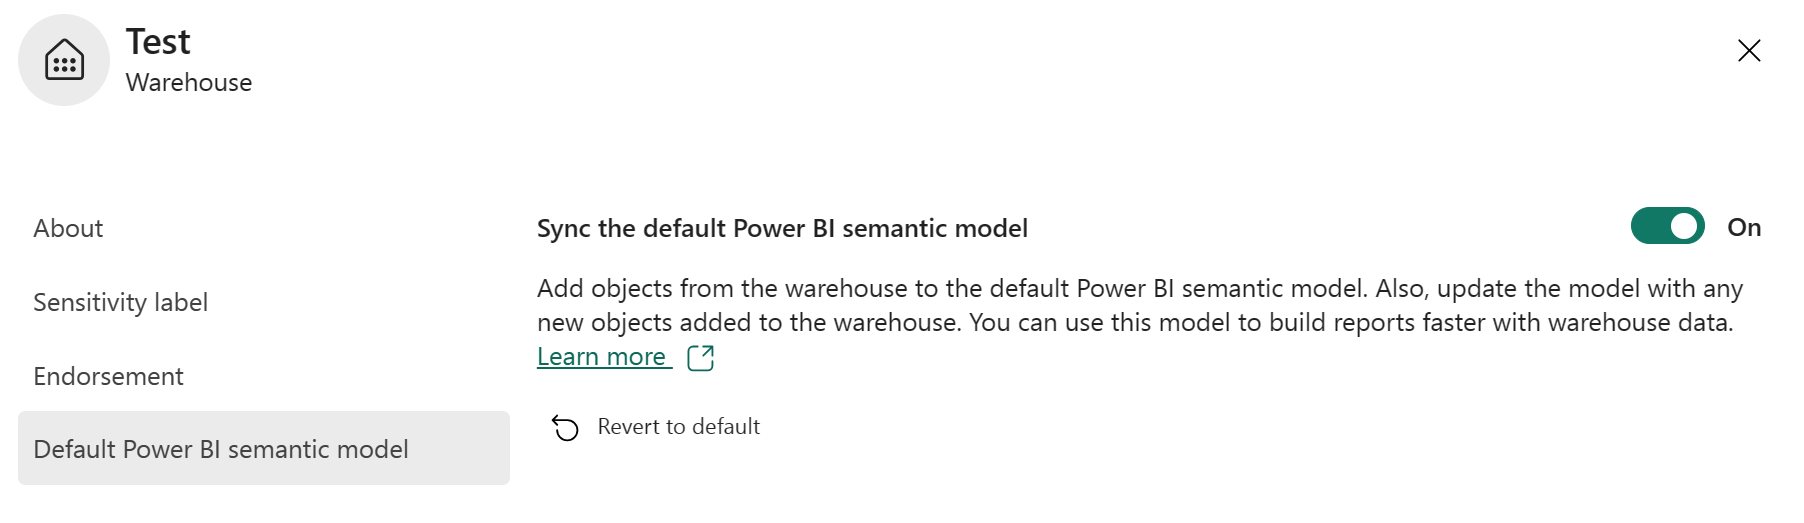 Screenshot from the Fabric portal showing the setting Sync the default Power BI semantic model is enabled.